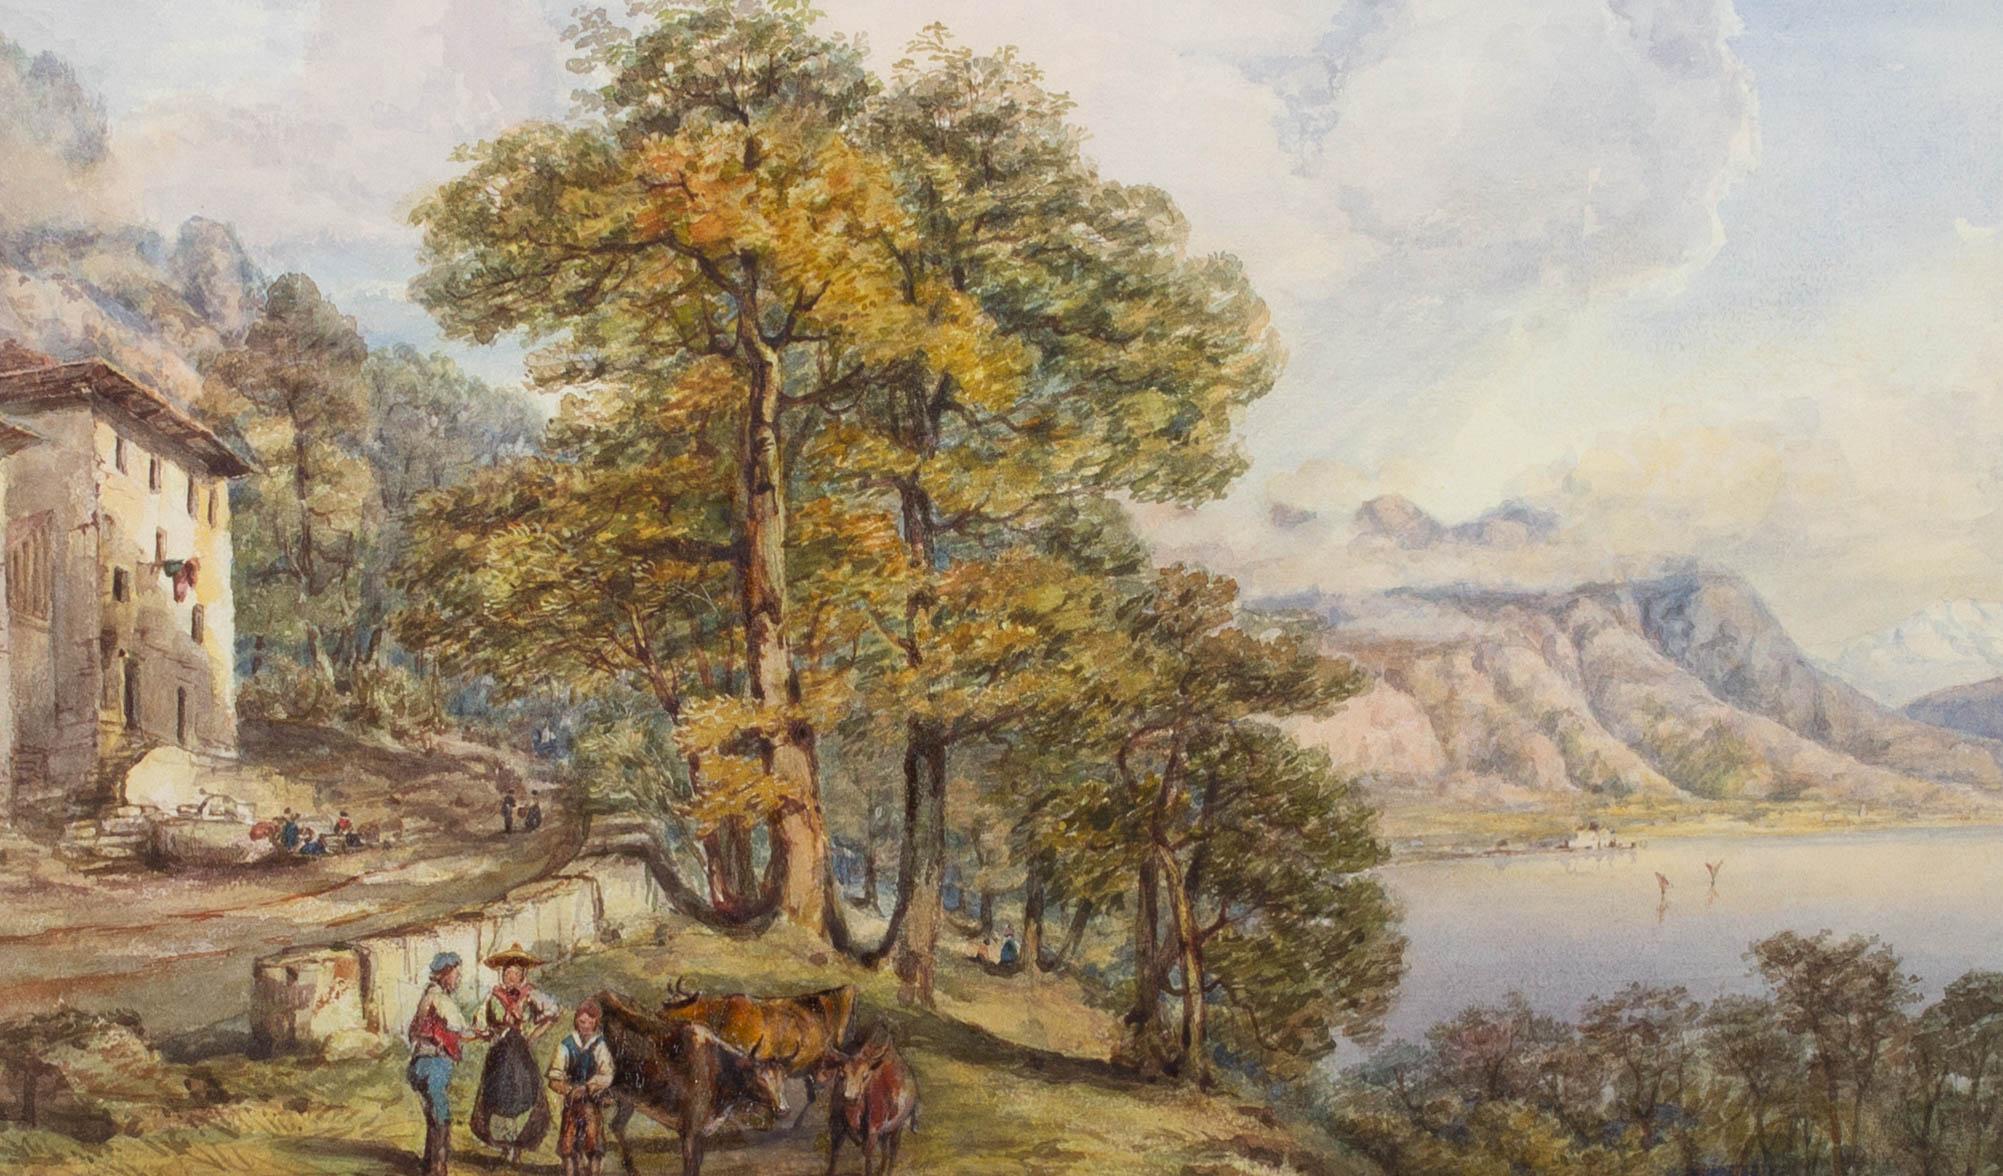 A watercolour and gum arabic view along the coastline between Montreux and Chillon Castle in Switzerland with figures and cattle in the foreground. The watermark dates the painting to 1849. The artist painted this scene three times with the other